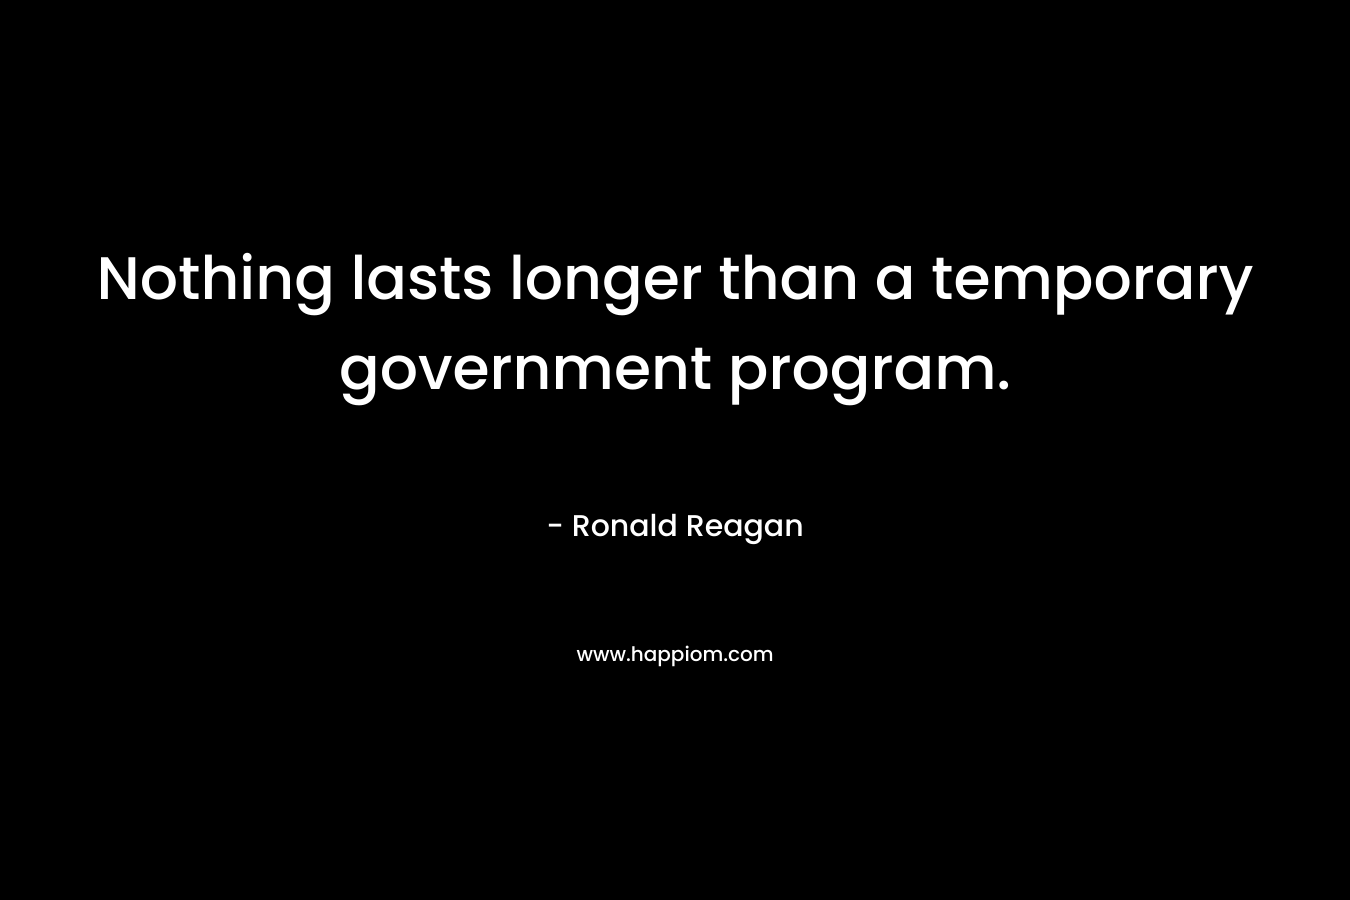 Nothing lasts longer than a temporary government program. – Ronald Reagan